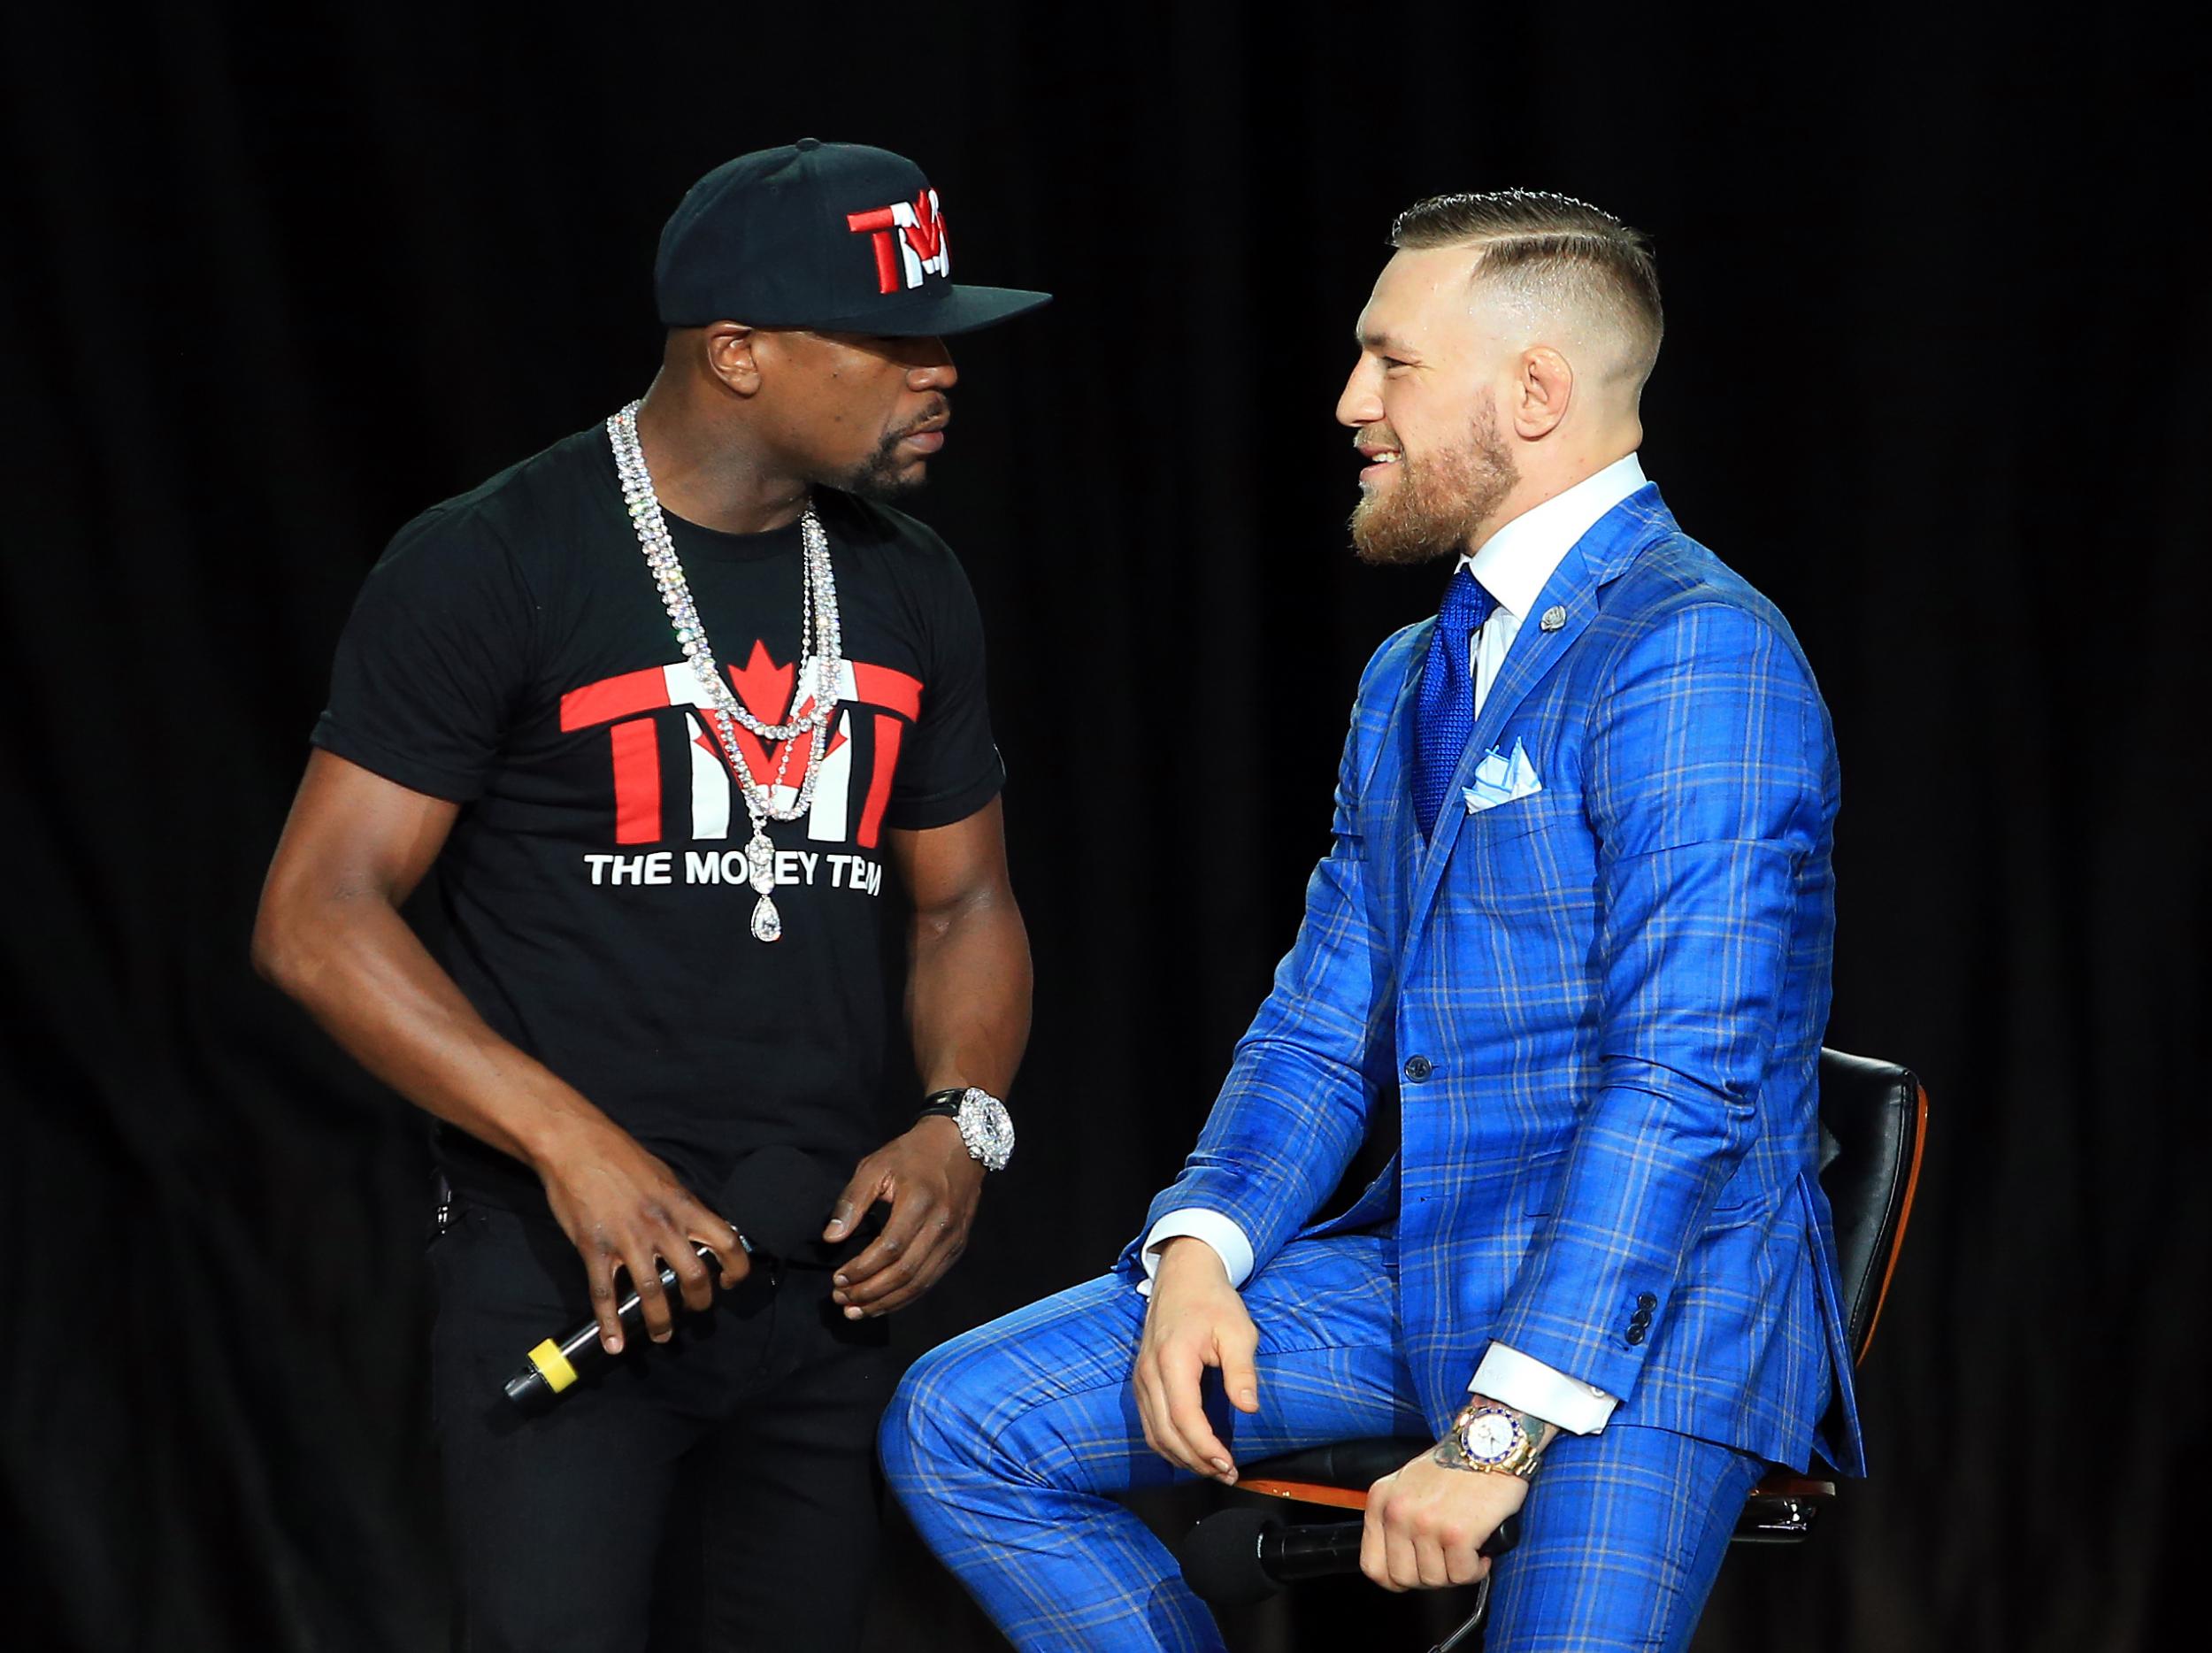 What It Was Like To Be At The Mayweather-McGregor Fight  Men's Health What  it was like being at the Mayweather-McGregor fight